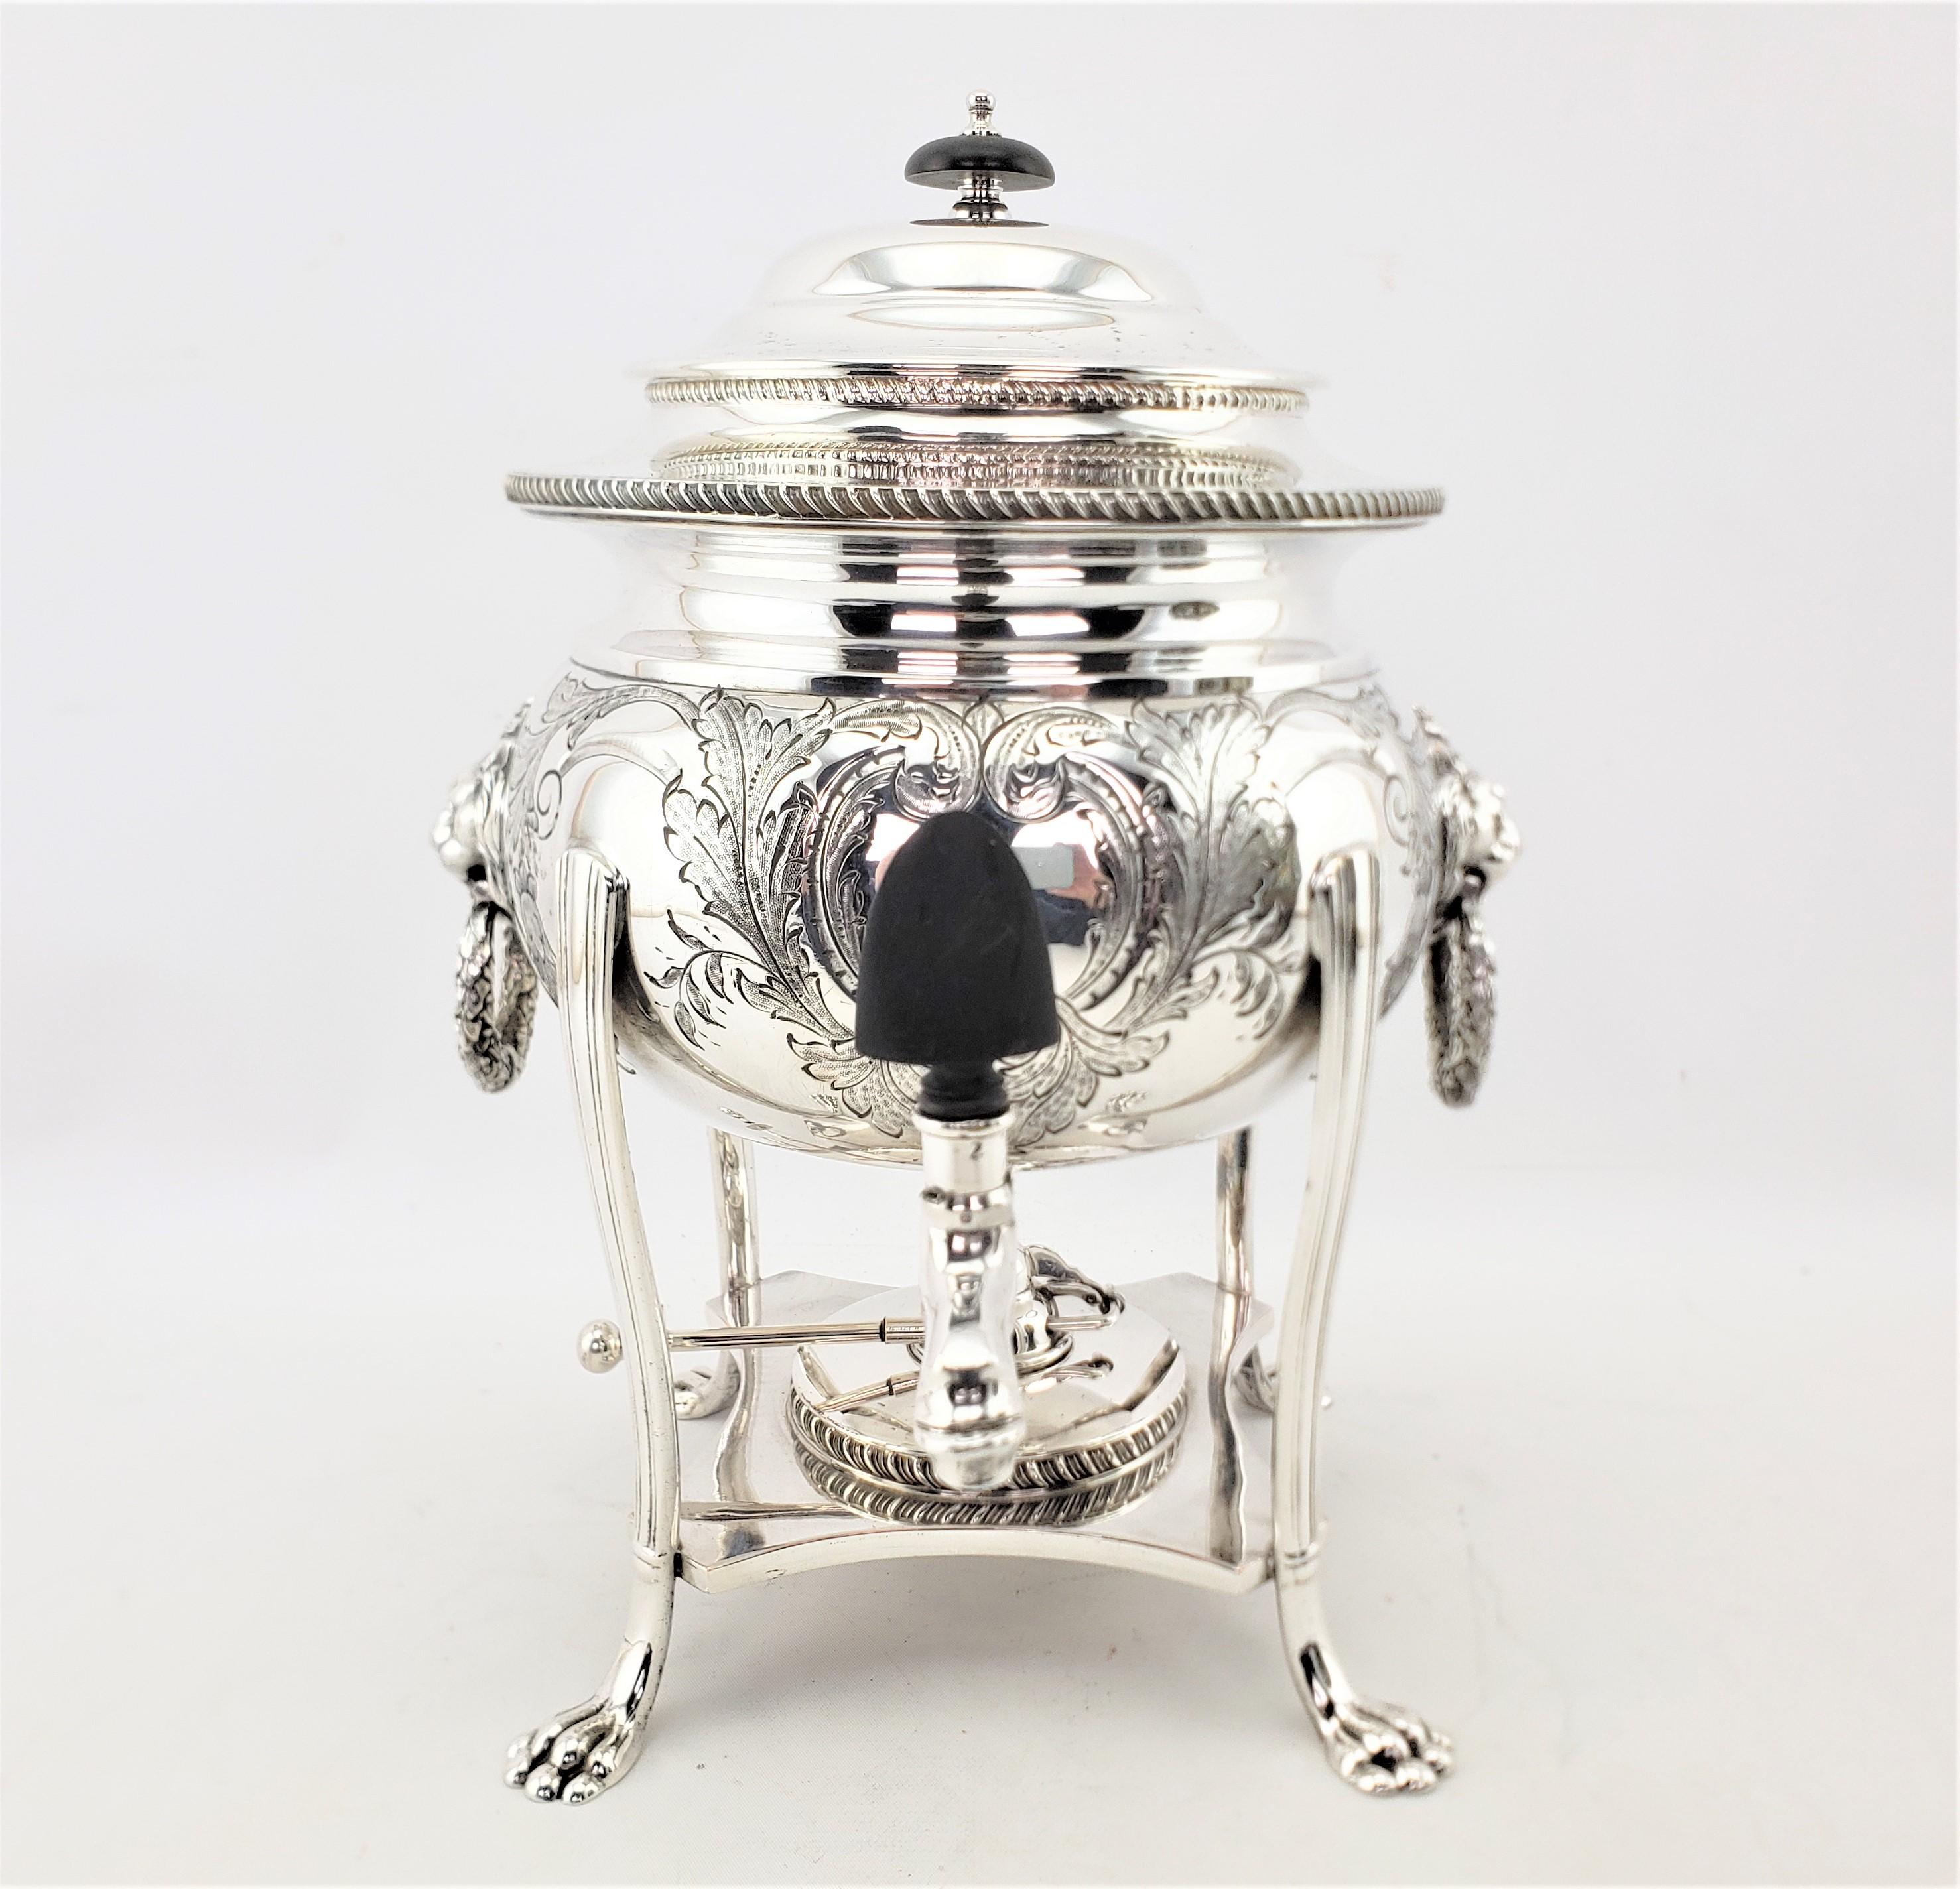 Machine-Made Antique English Silver Plated Tea or Hot Water Urn with Lion Mounts & Engraving